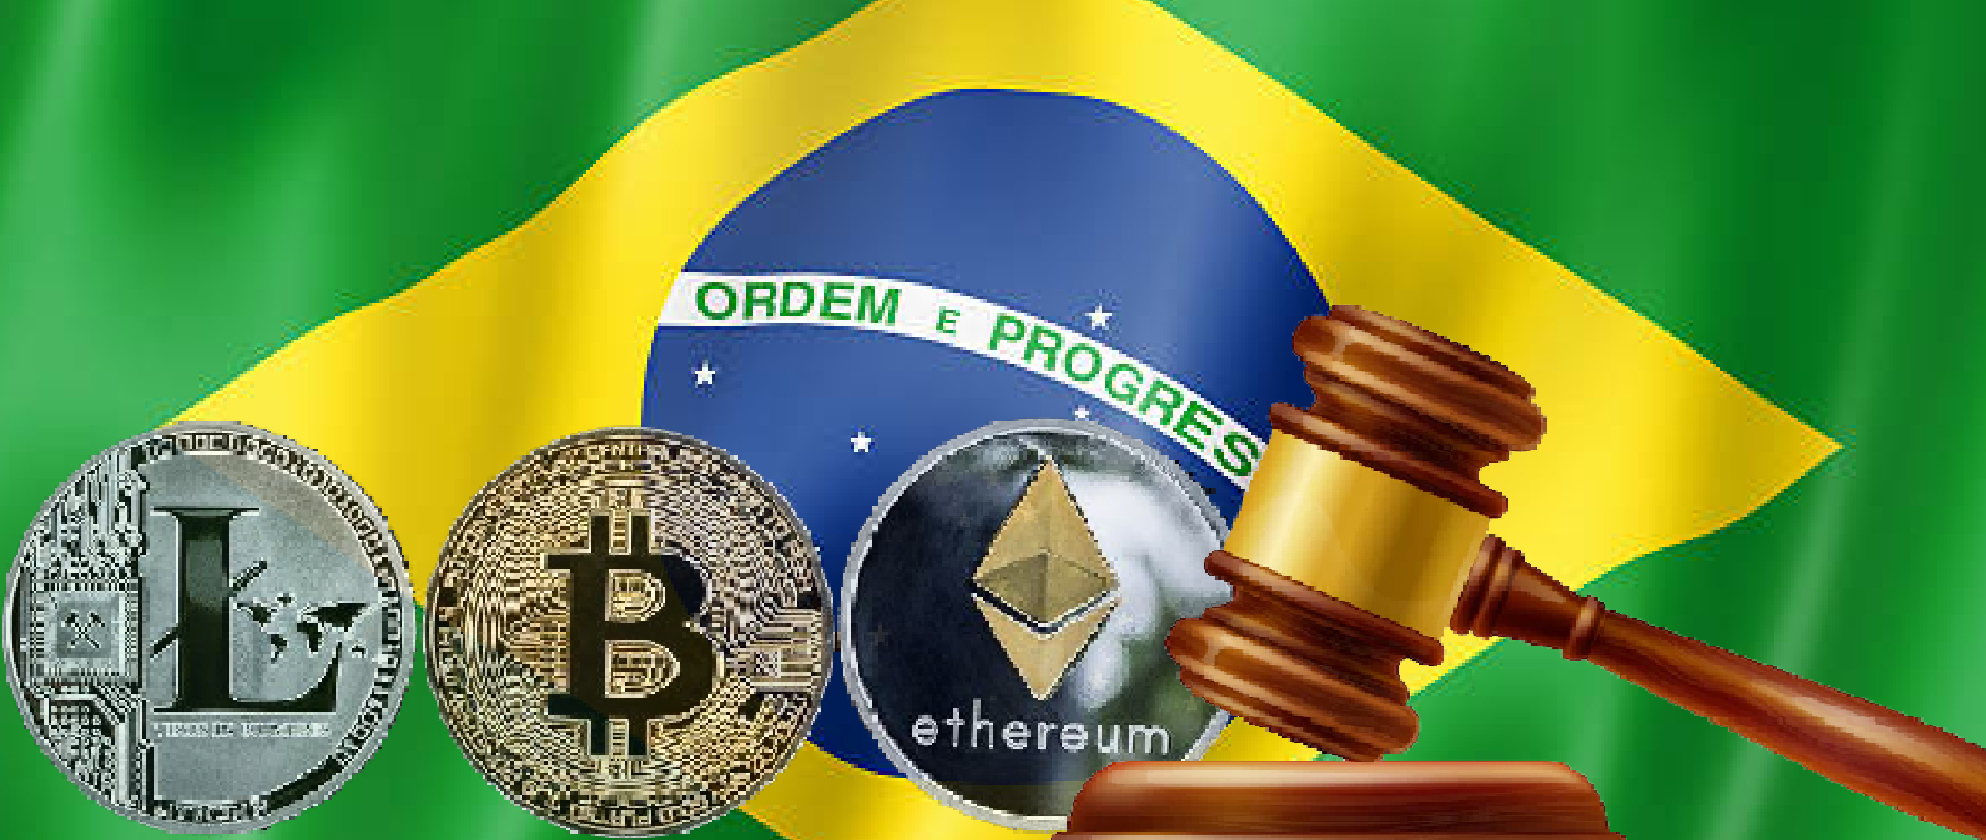 Brazil To Finally Regulate Cryptocurrencies? - The Coin Republic:  Cryptocurrency , Bitcoin, Ethereum & Blockchain News